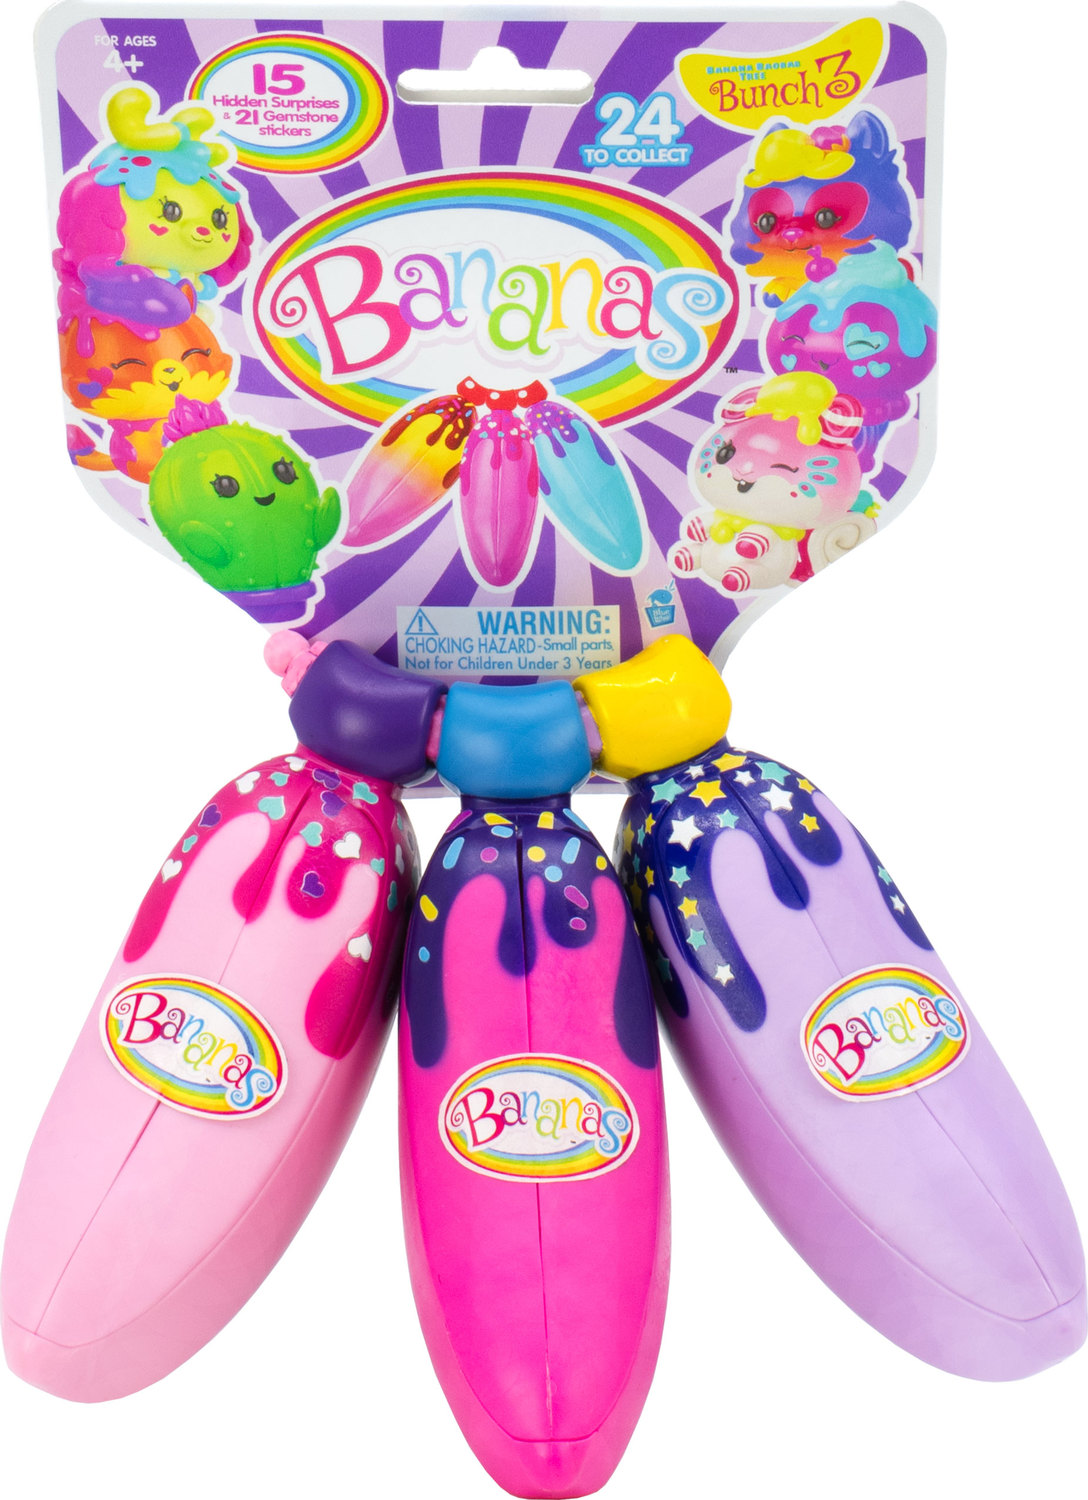 Series 1 2 3 Bright scented Bananas with cute crushie characters Bananas 